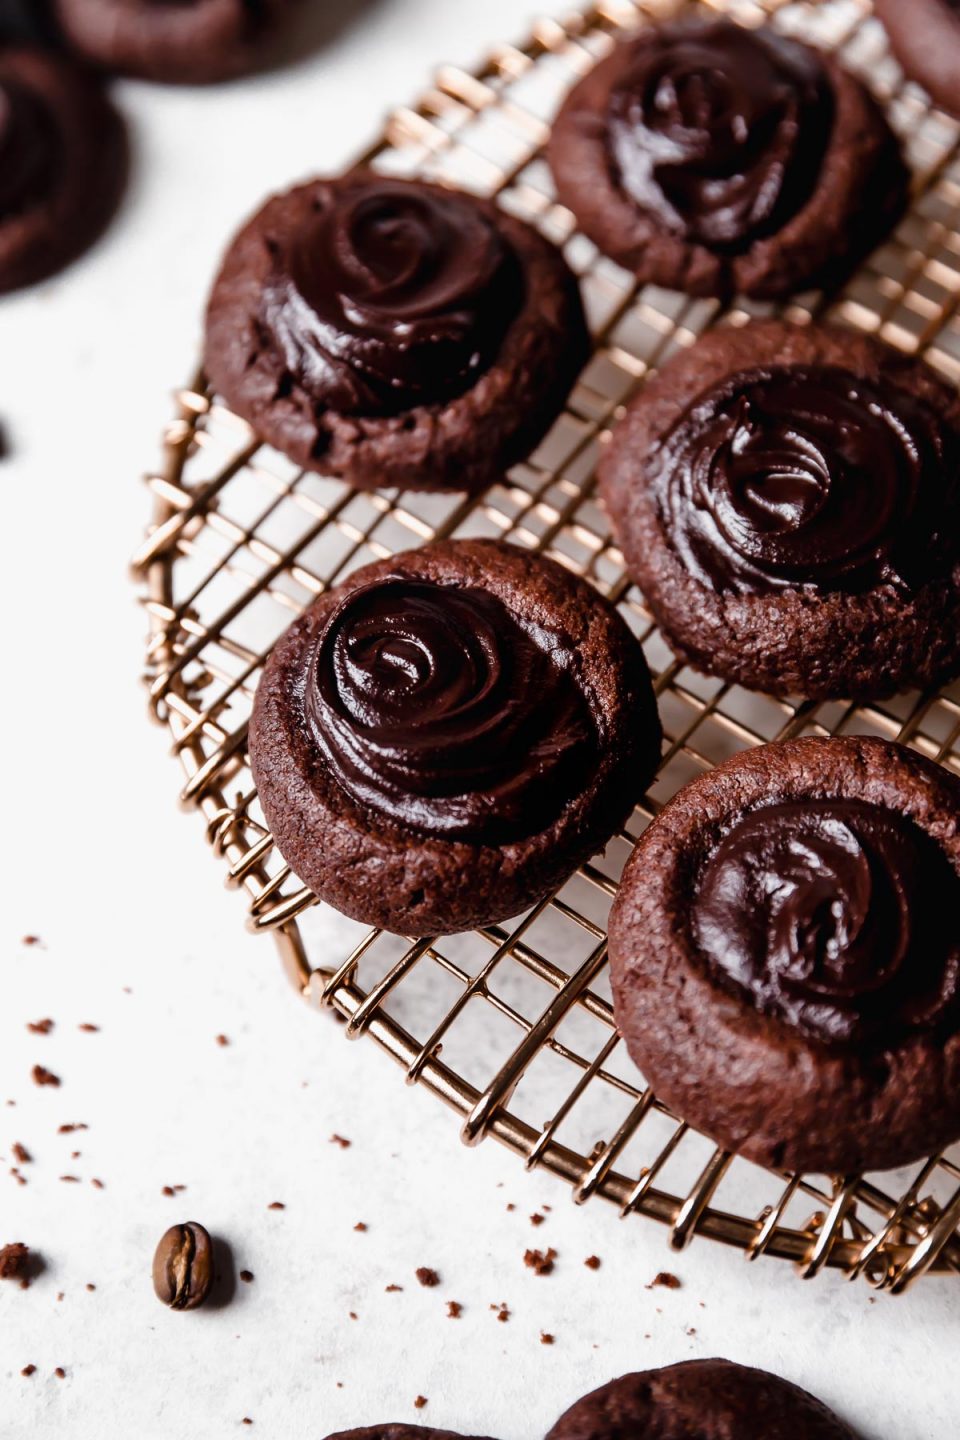 Double chocolate thumbprint cookies arranged on a copper wire baking rack, a top a white surface.